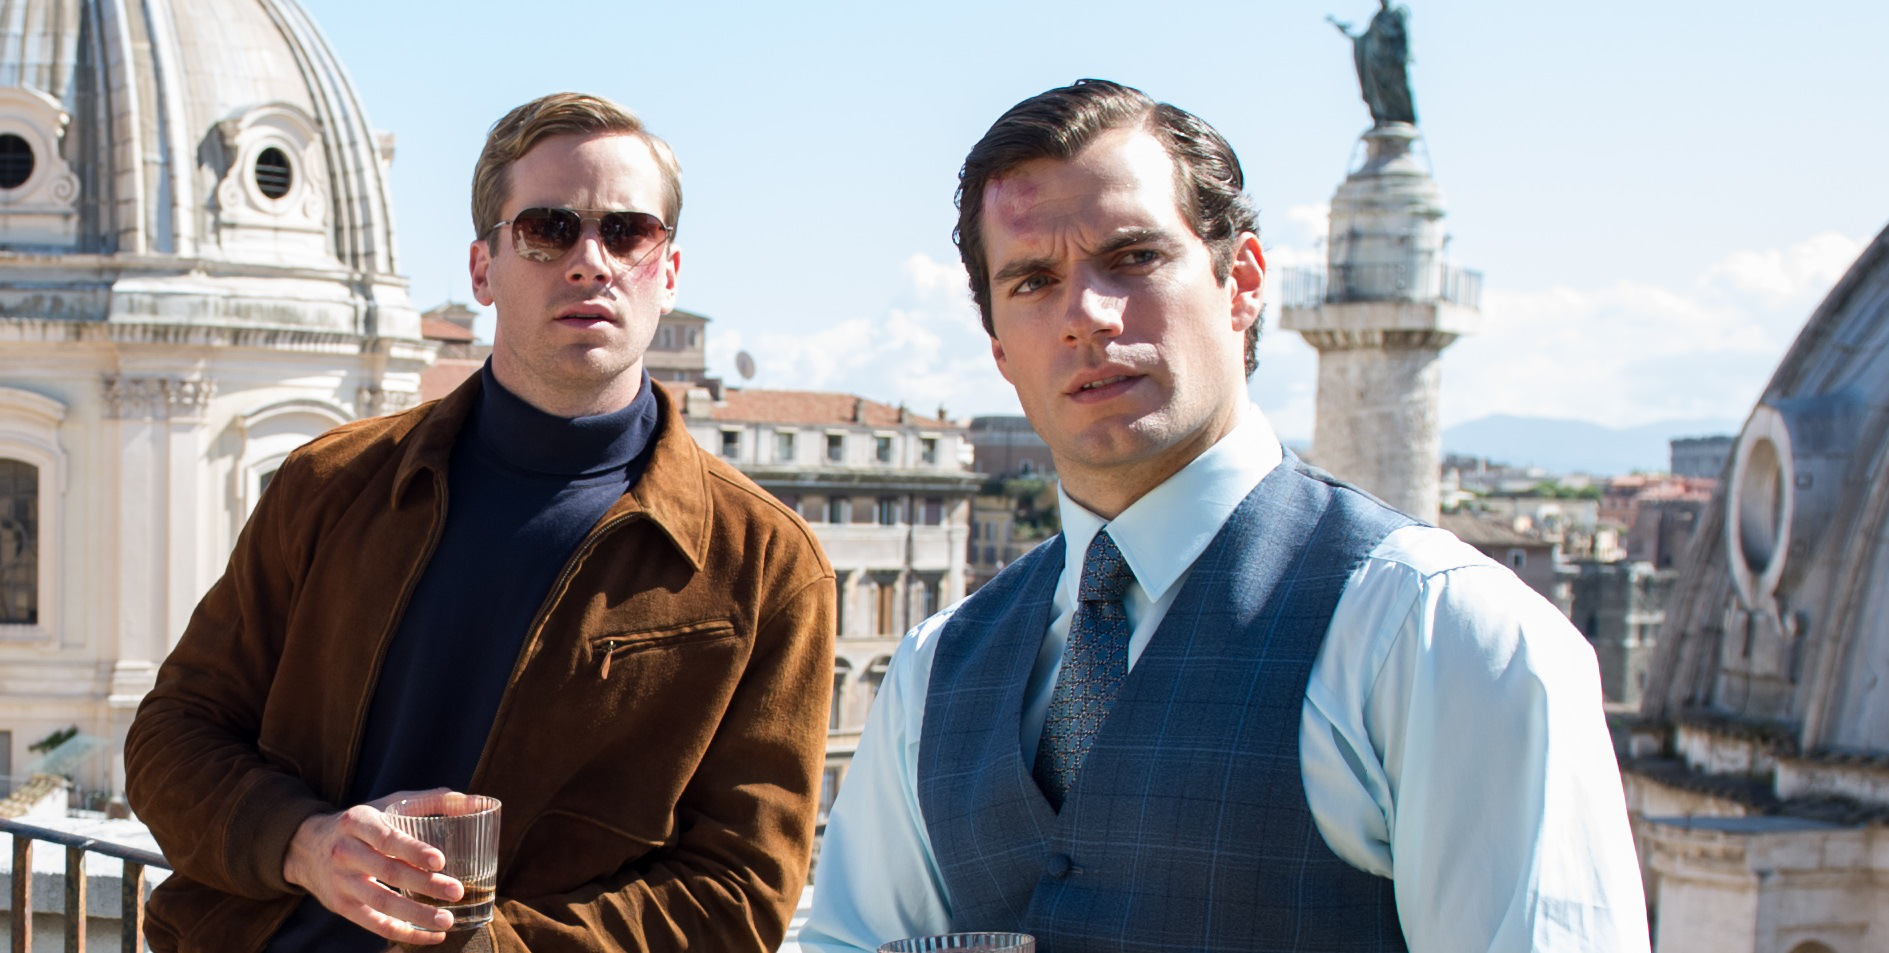 Saving The World With Class In The Man From U.N.C.L.E.